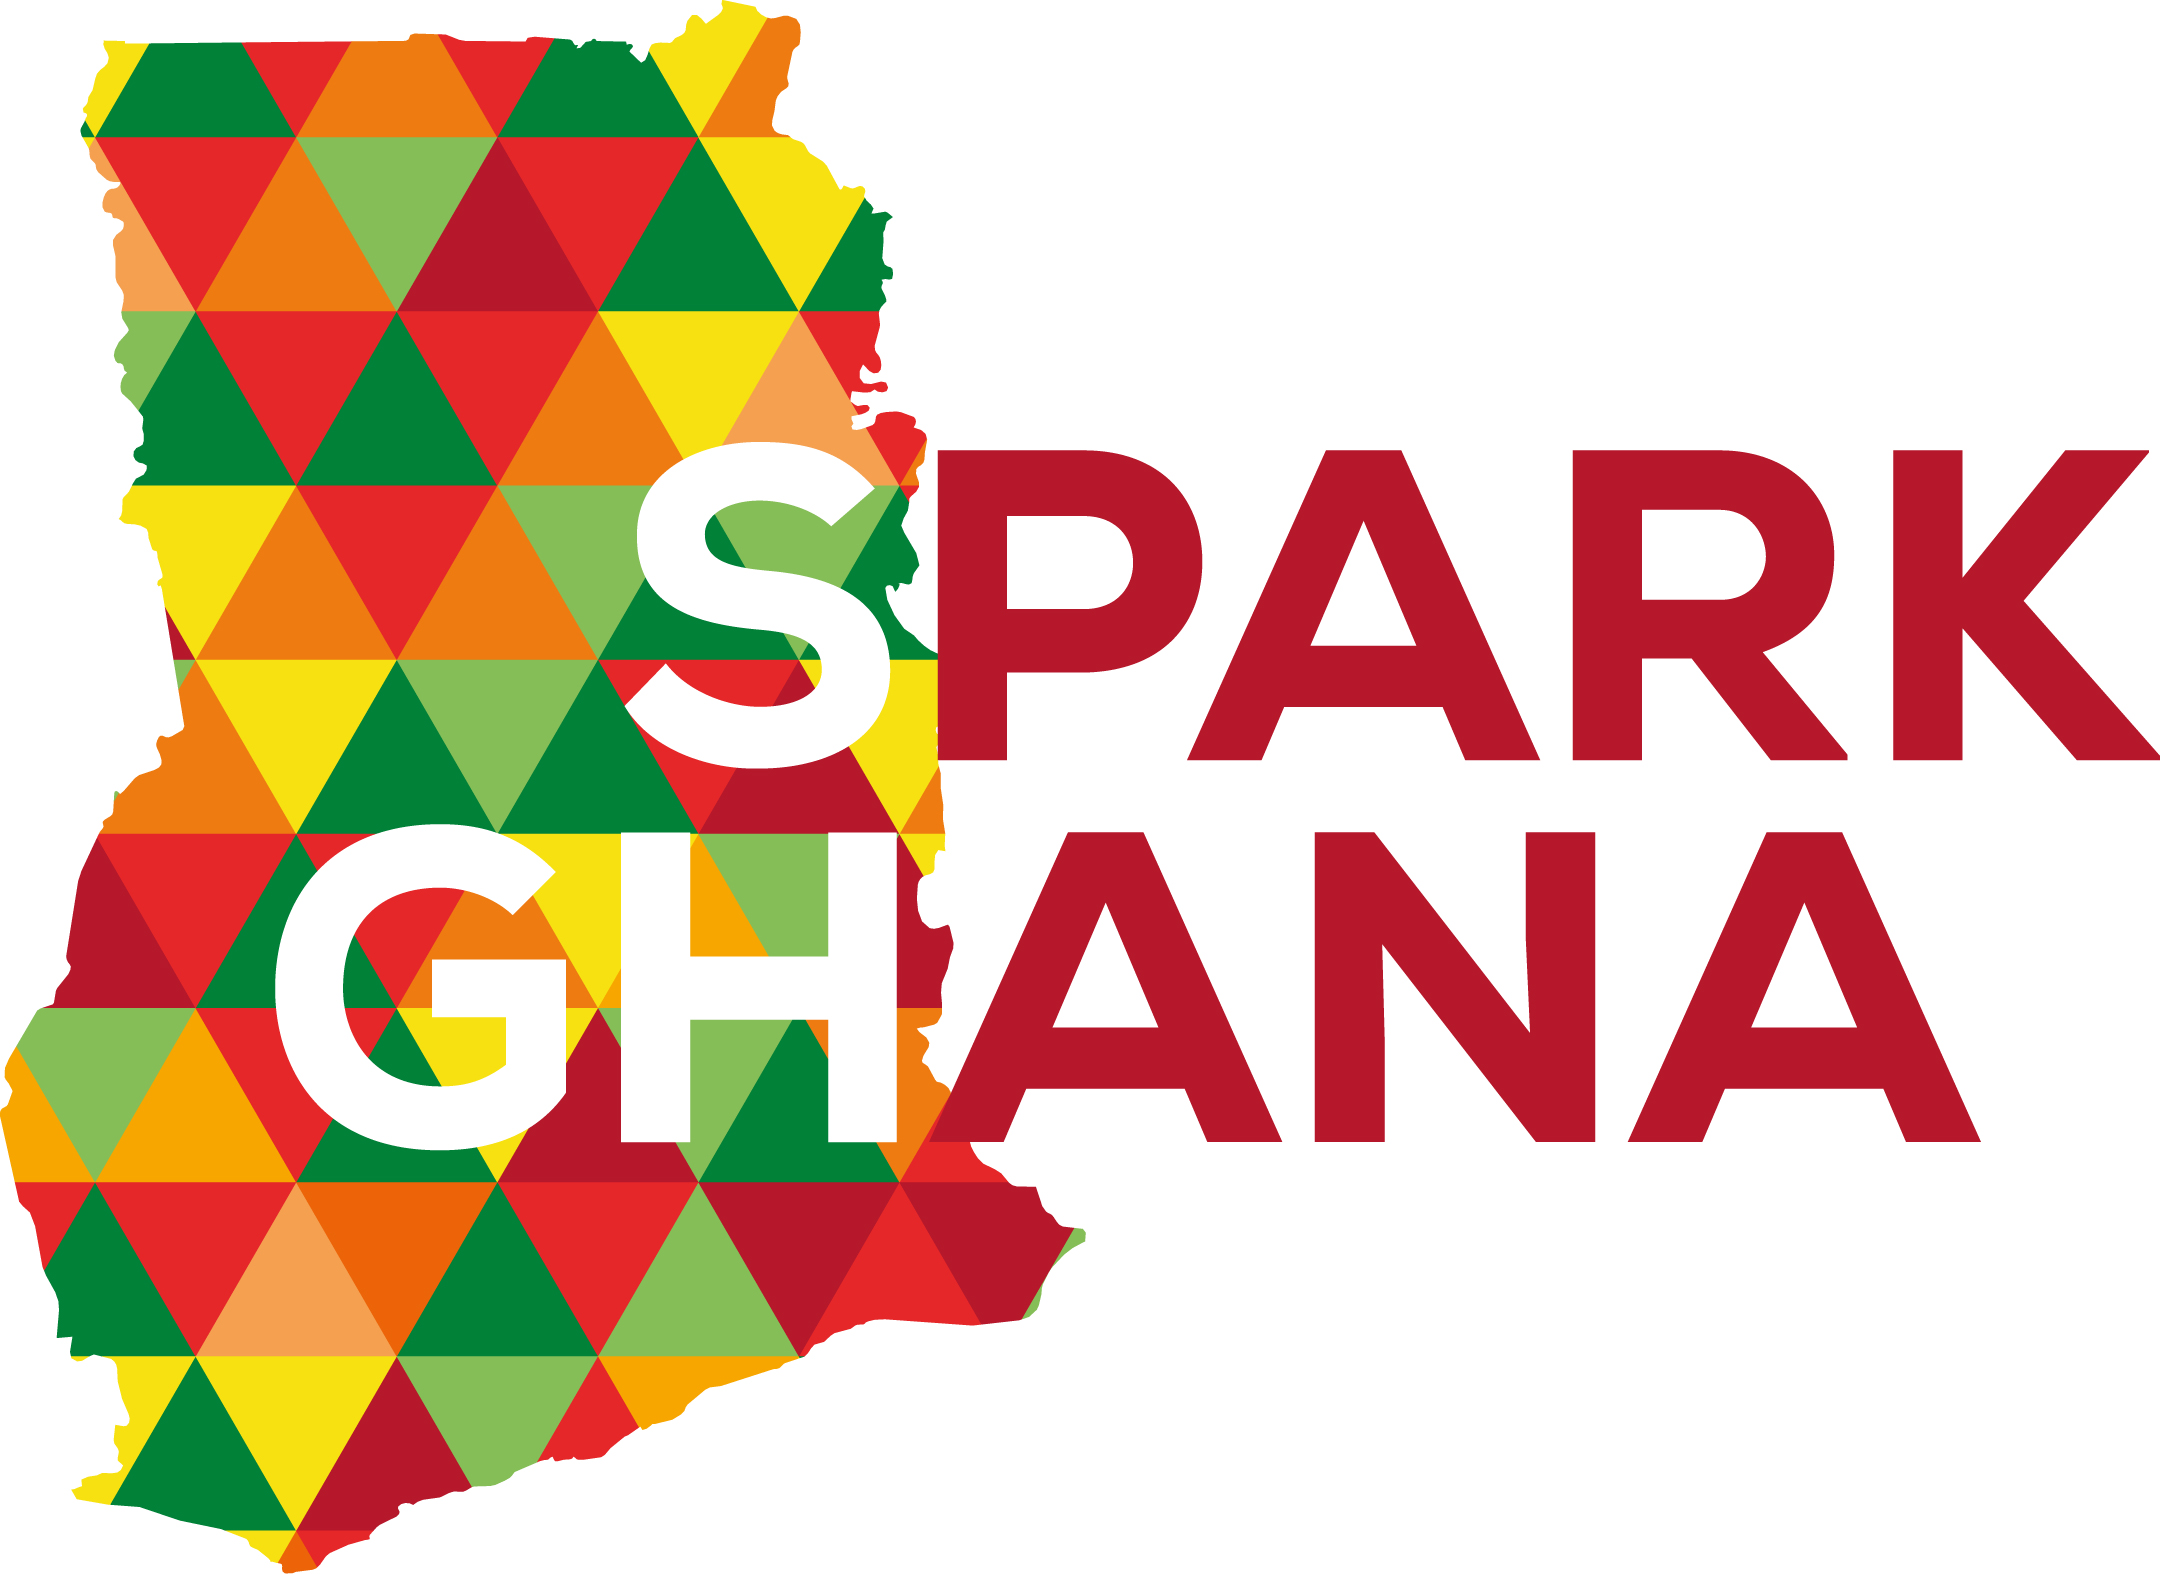 Sign up now to Spark Ghana